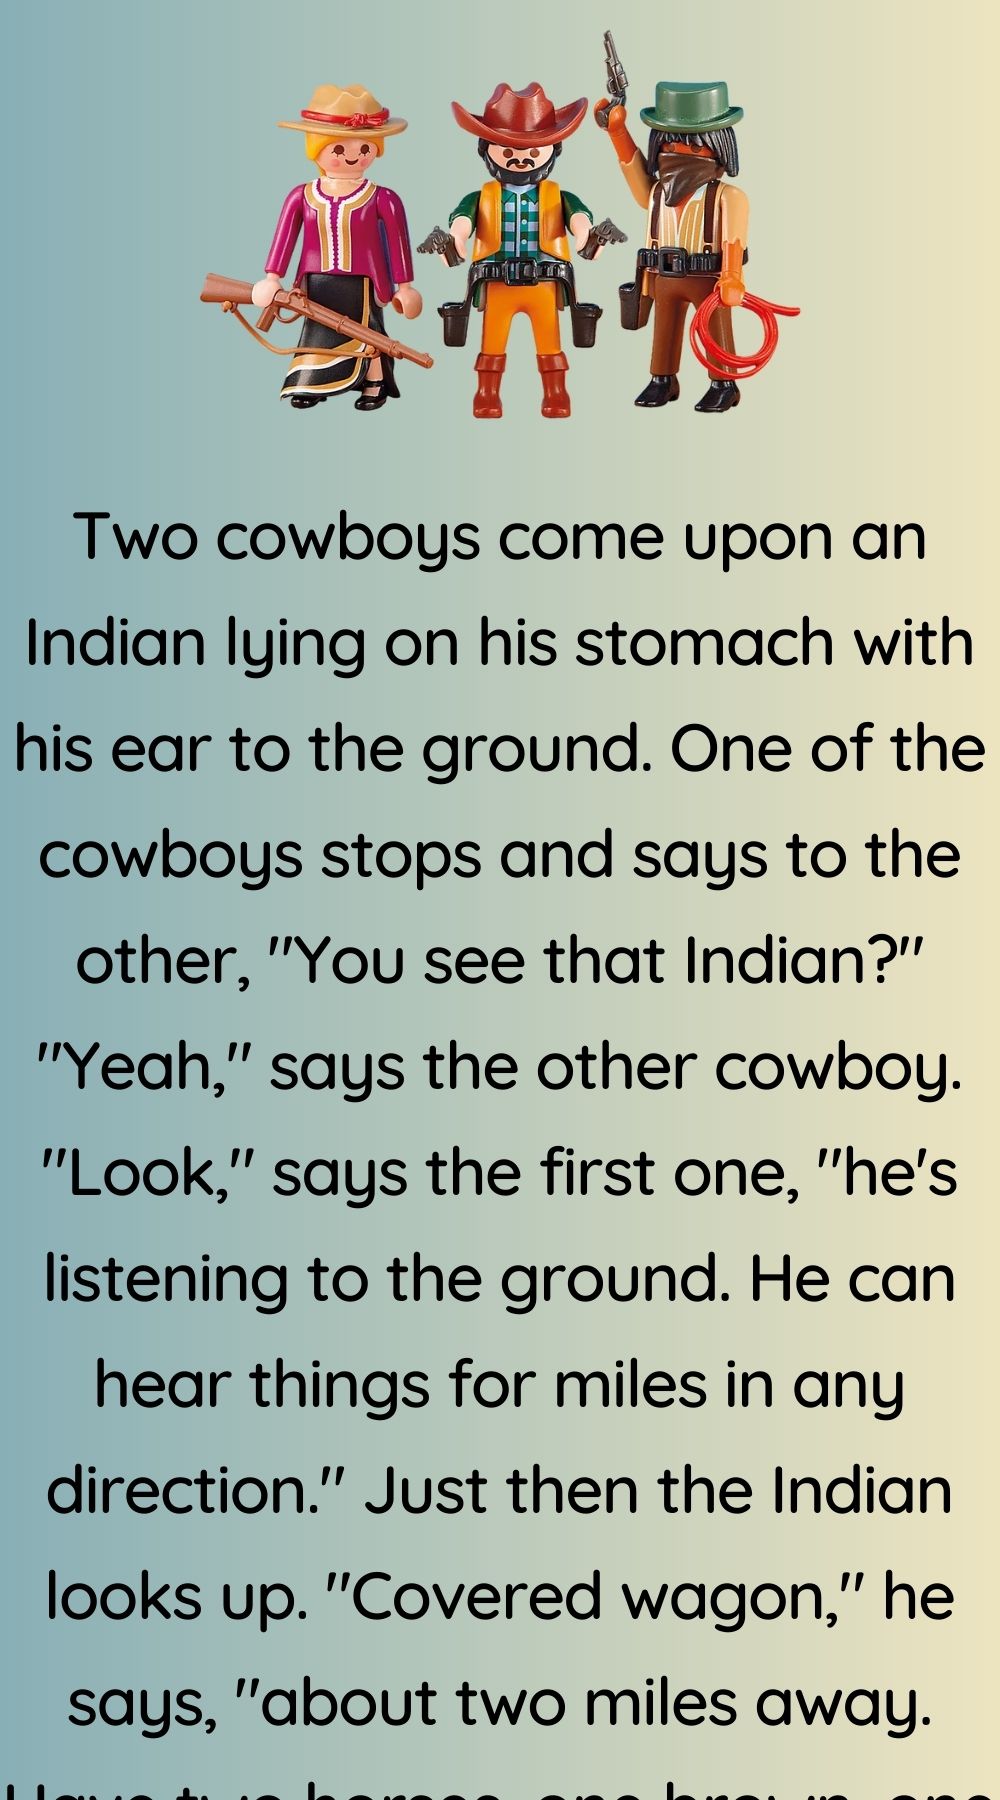 Two cowboys come upon an Indian